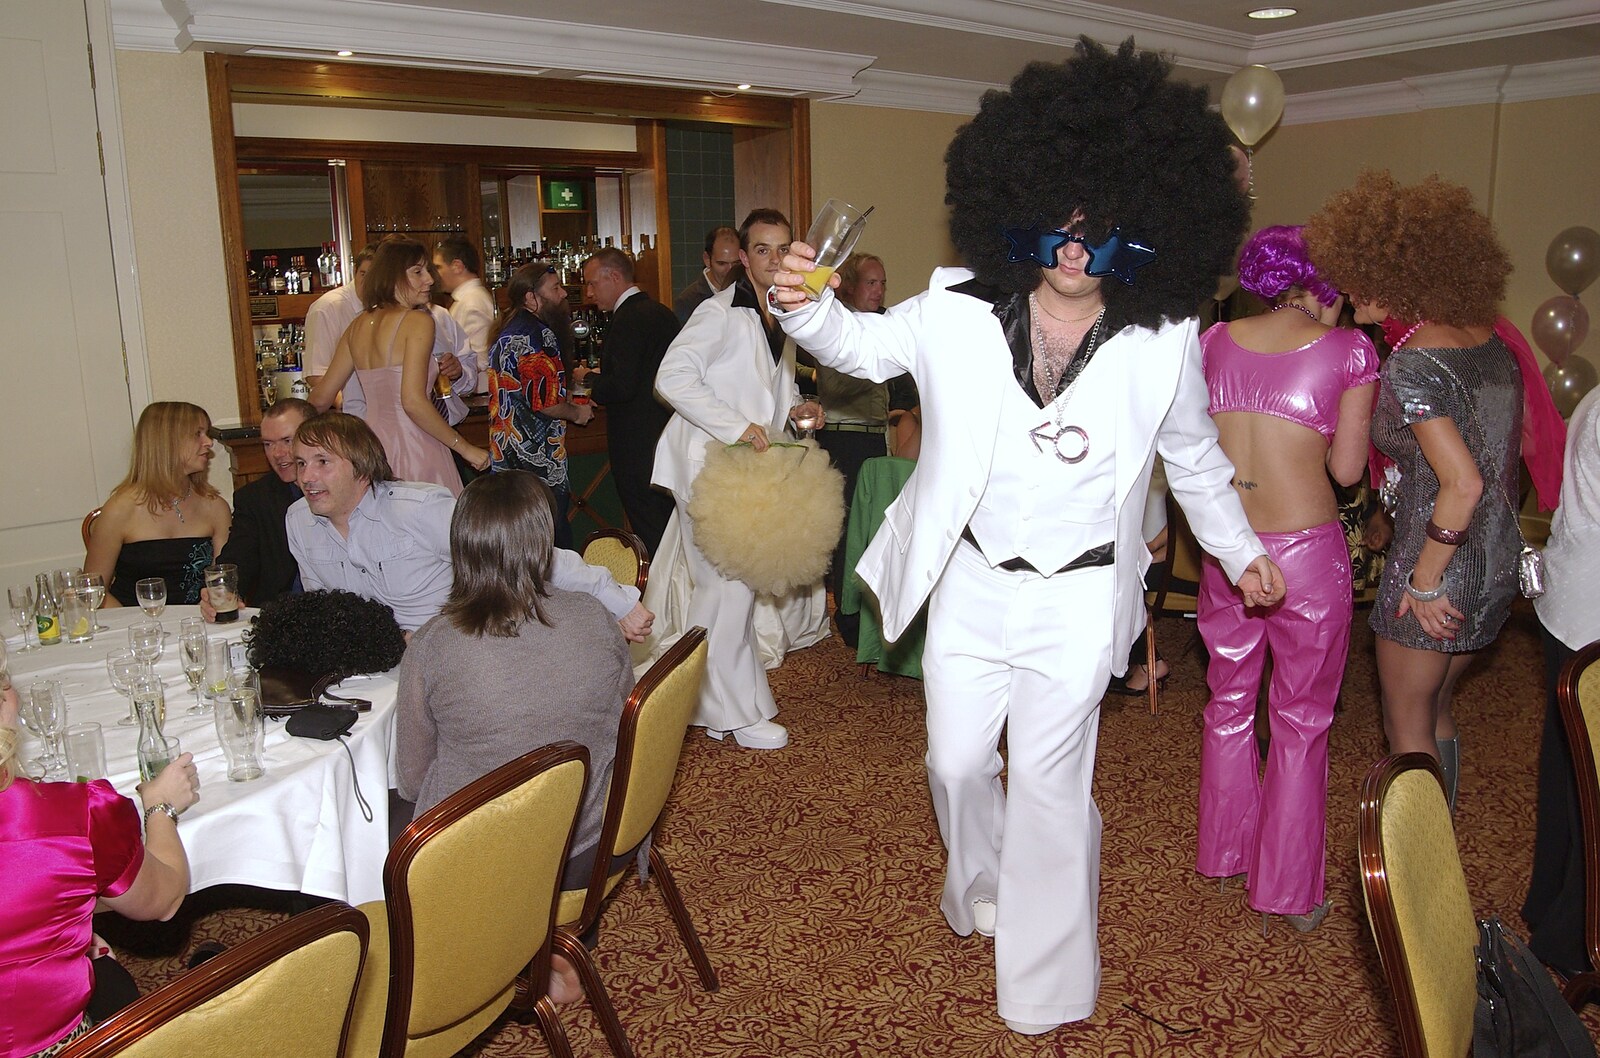 The big wig dude from A BSCC Presentation, and Matt's Wedding Reception, Solihull - 6th October 2007